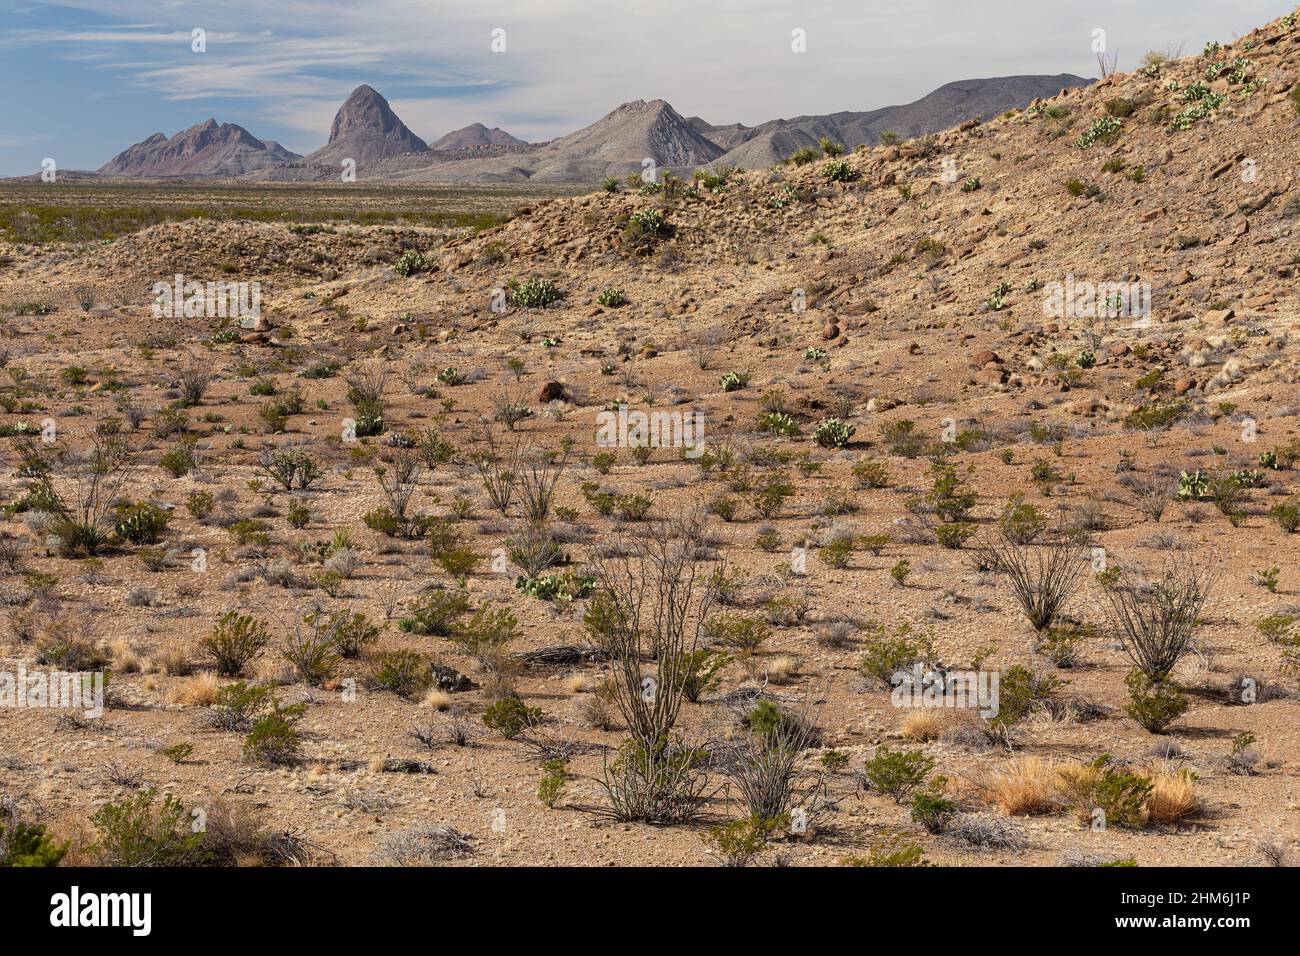 Chihuahuan Desert scrub stretches to the horizon, with Elephant Tusk in the background. Stock Photo